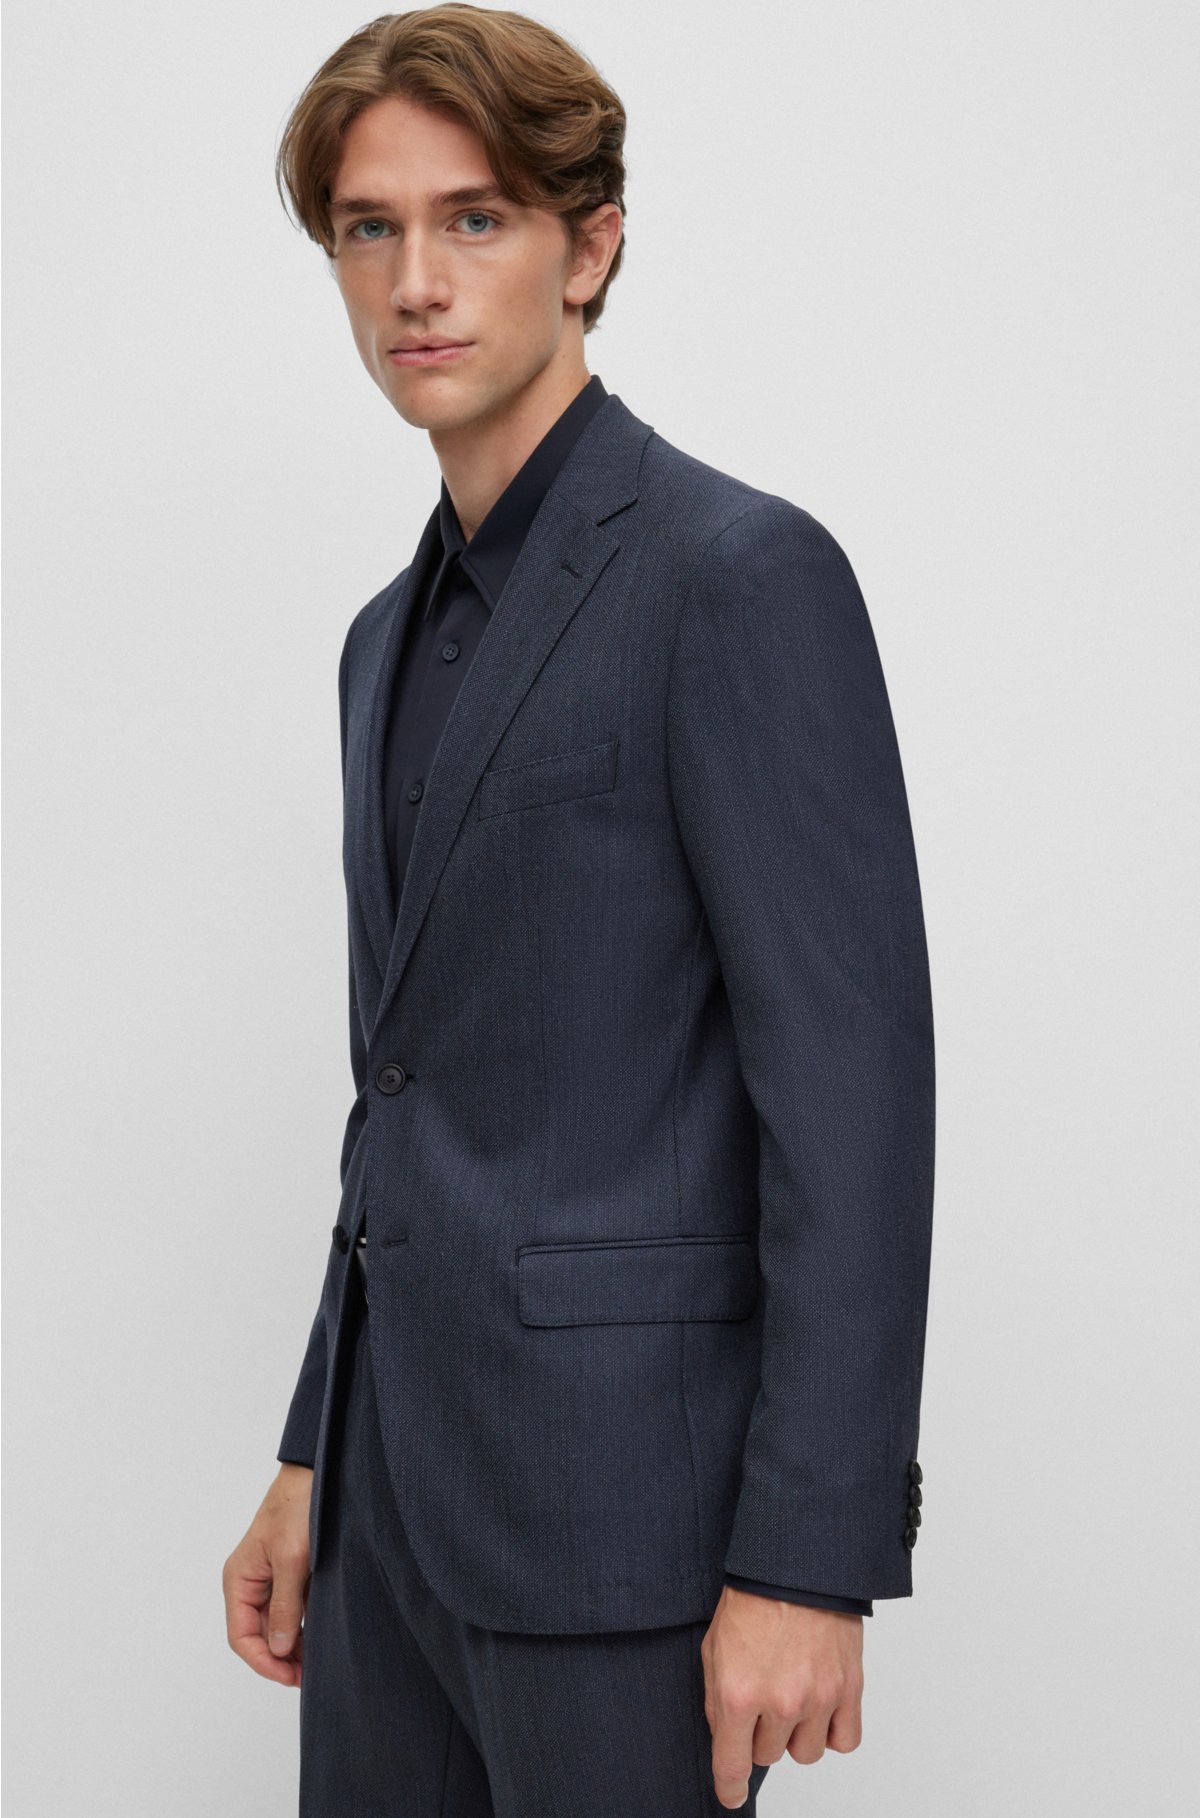 BOSS - Slim-fit suit in a performance-stretch wool blend